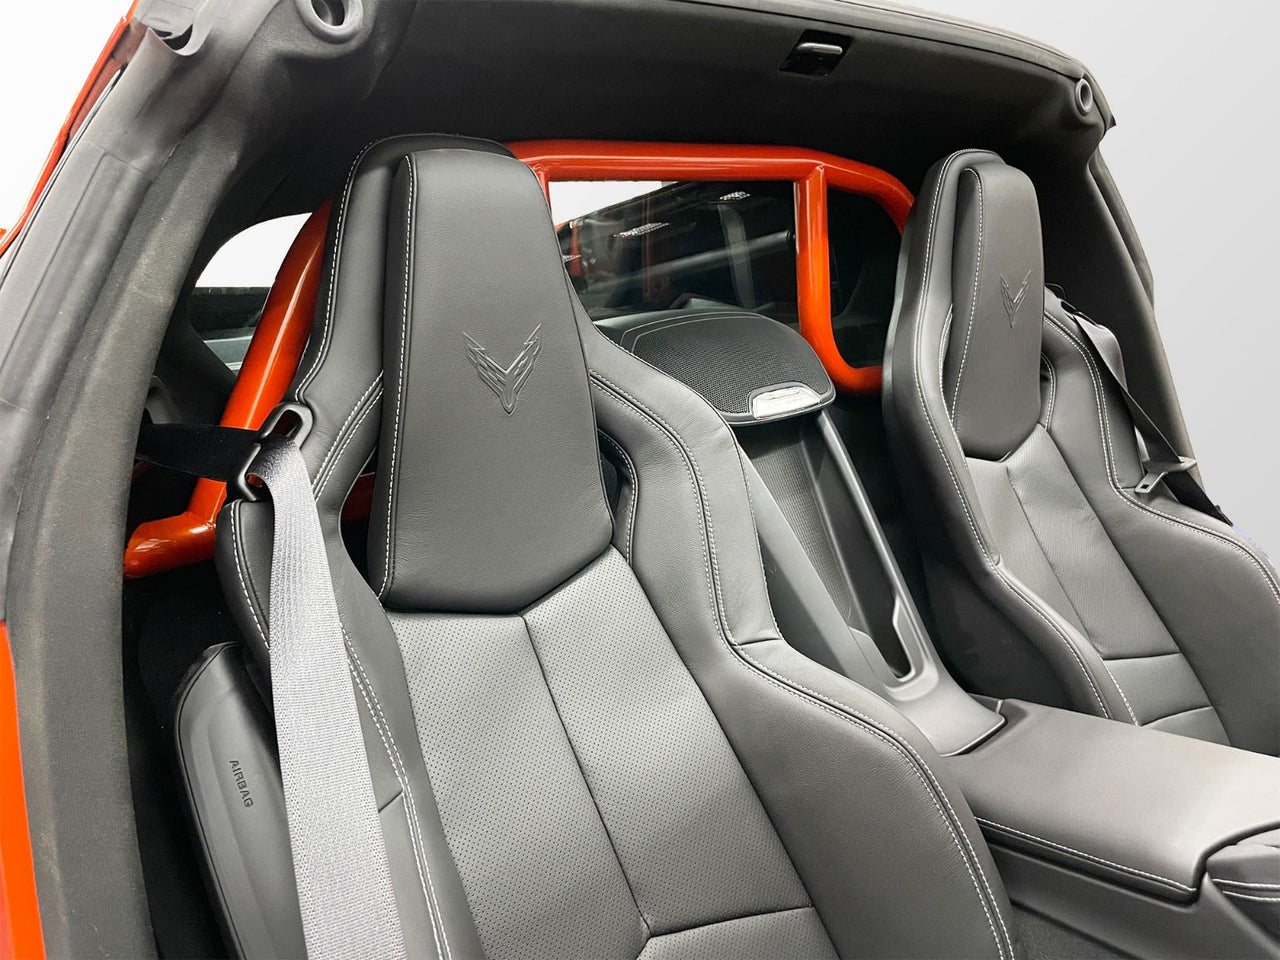 Designed specifically for the C8 Corvette, this harness bar provides a secure mounting point for racing harnesses, allowing drivers and passengers to stay securely strapped in during high-performance driving